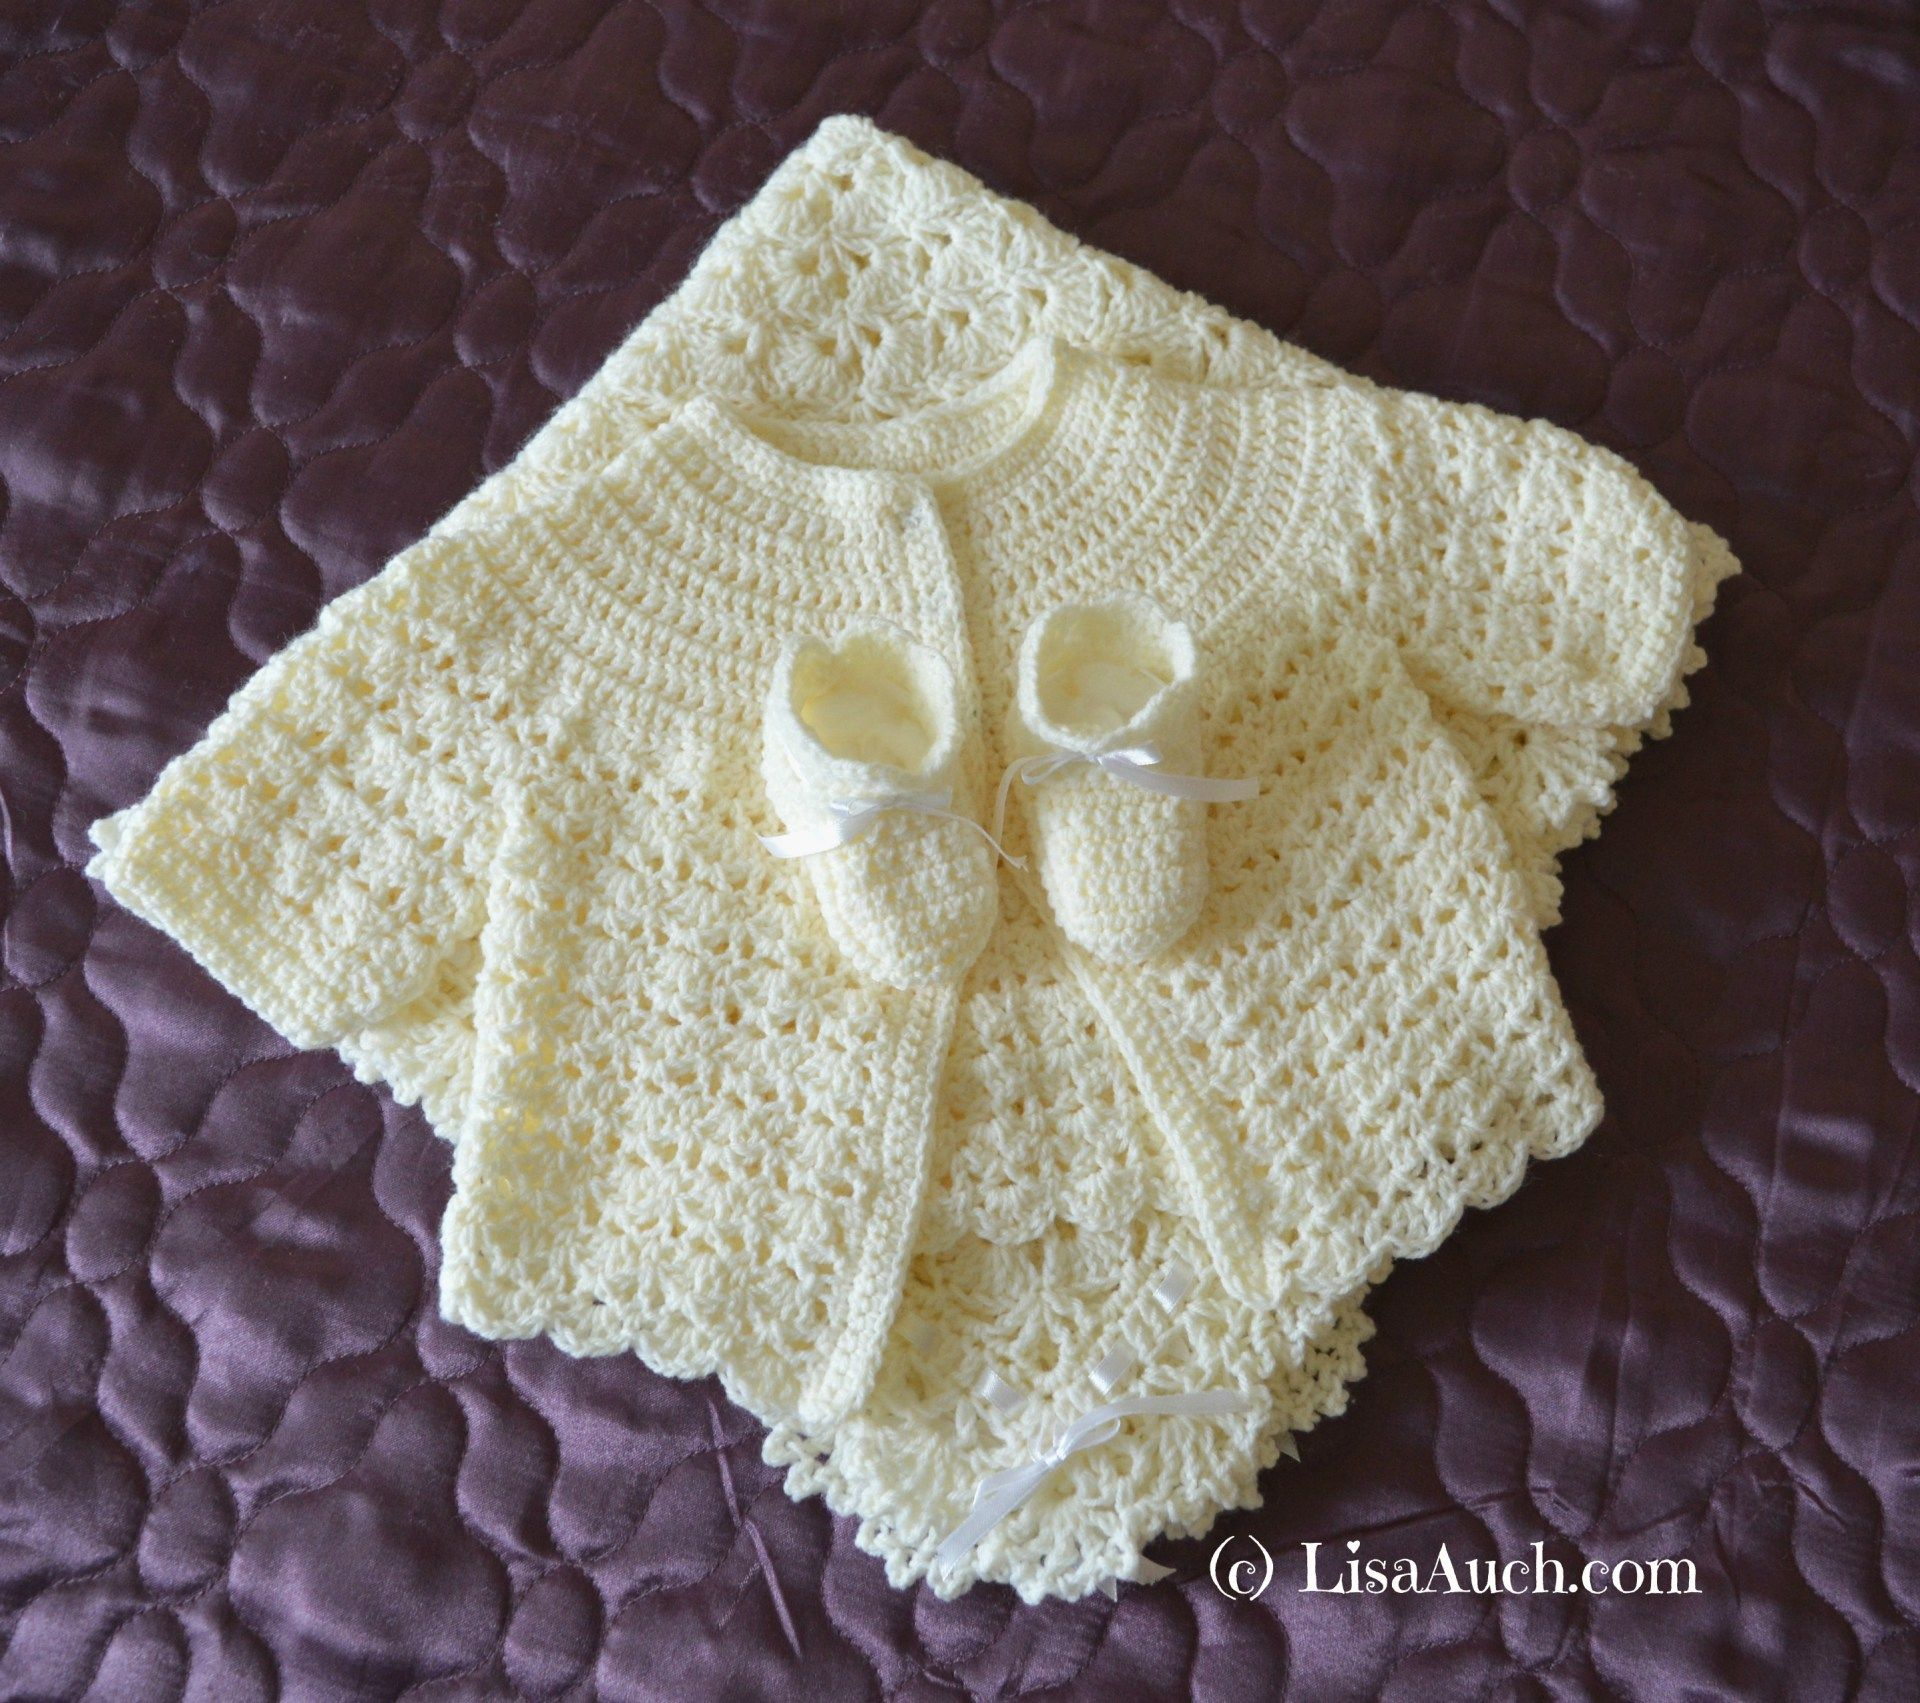 Free Crochet Baby Patterns Unique Crochet Ba Shawl Blanket Pattern Perfect Gift For A Newborn